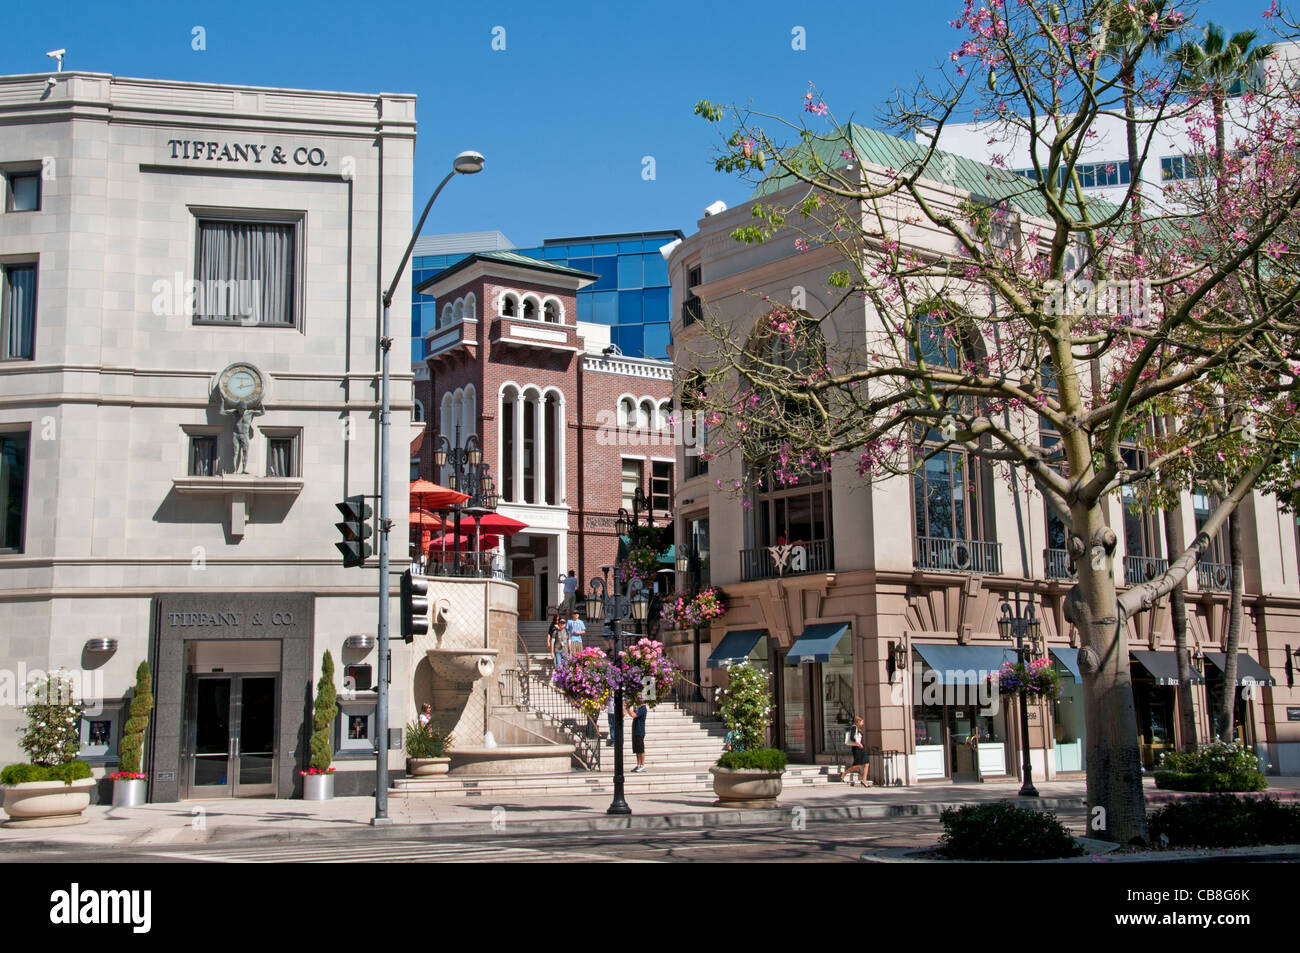 Tiffany & Co magasins boutiques de Rodeo Drive Beverly Hills Los Angeles California United States Banque D'Images